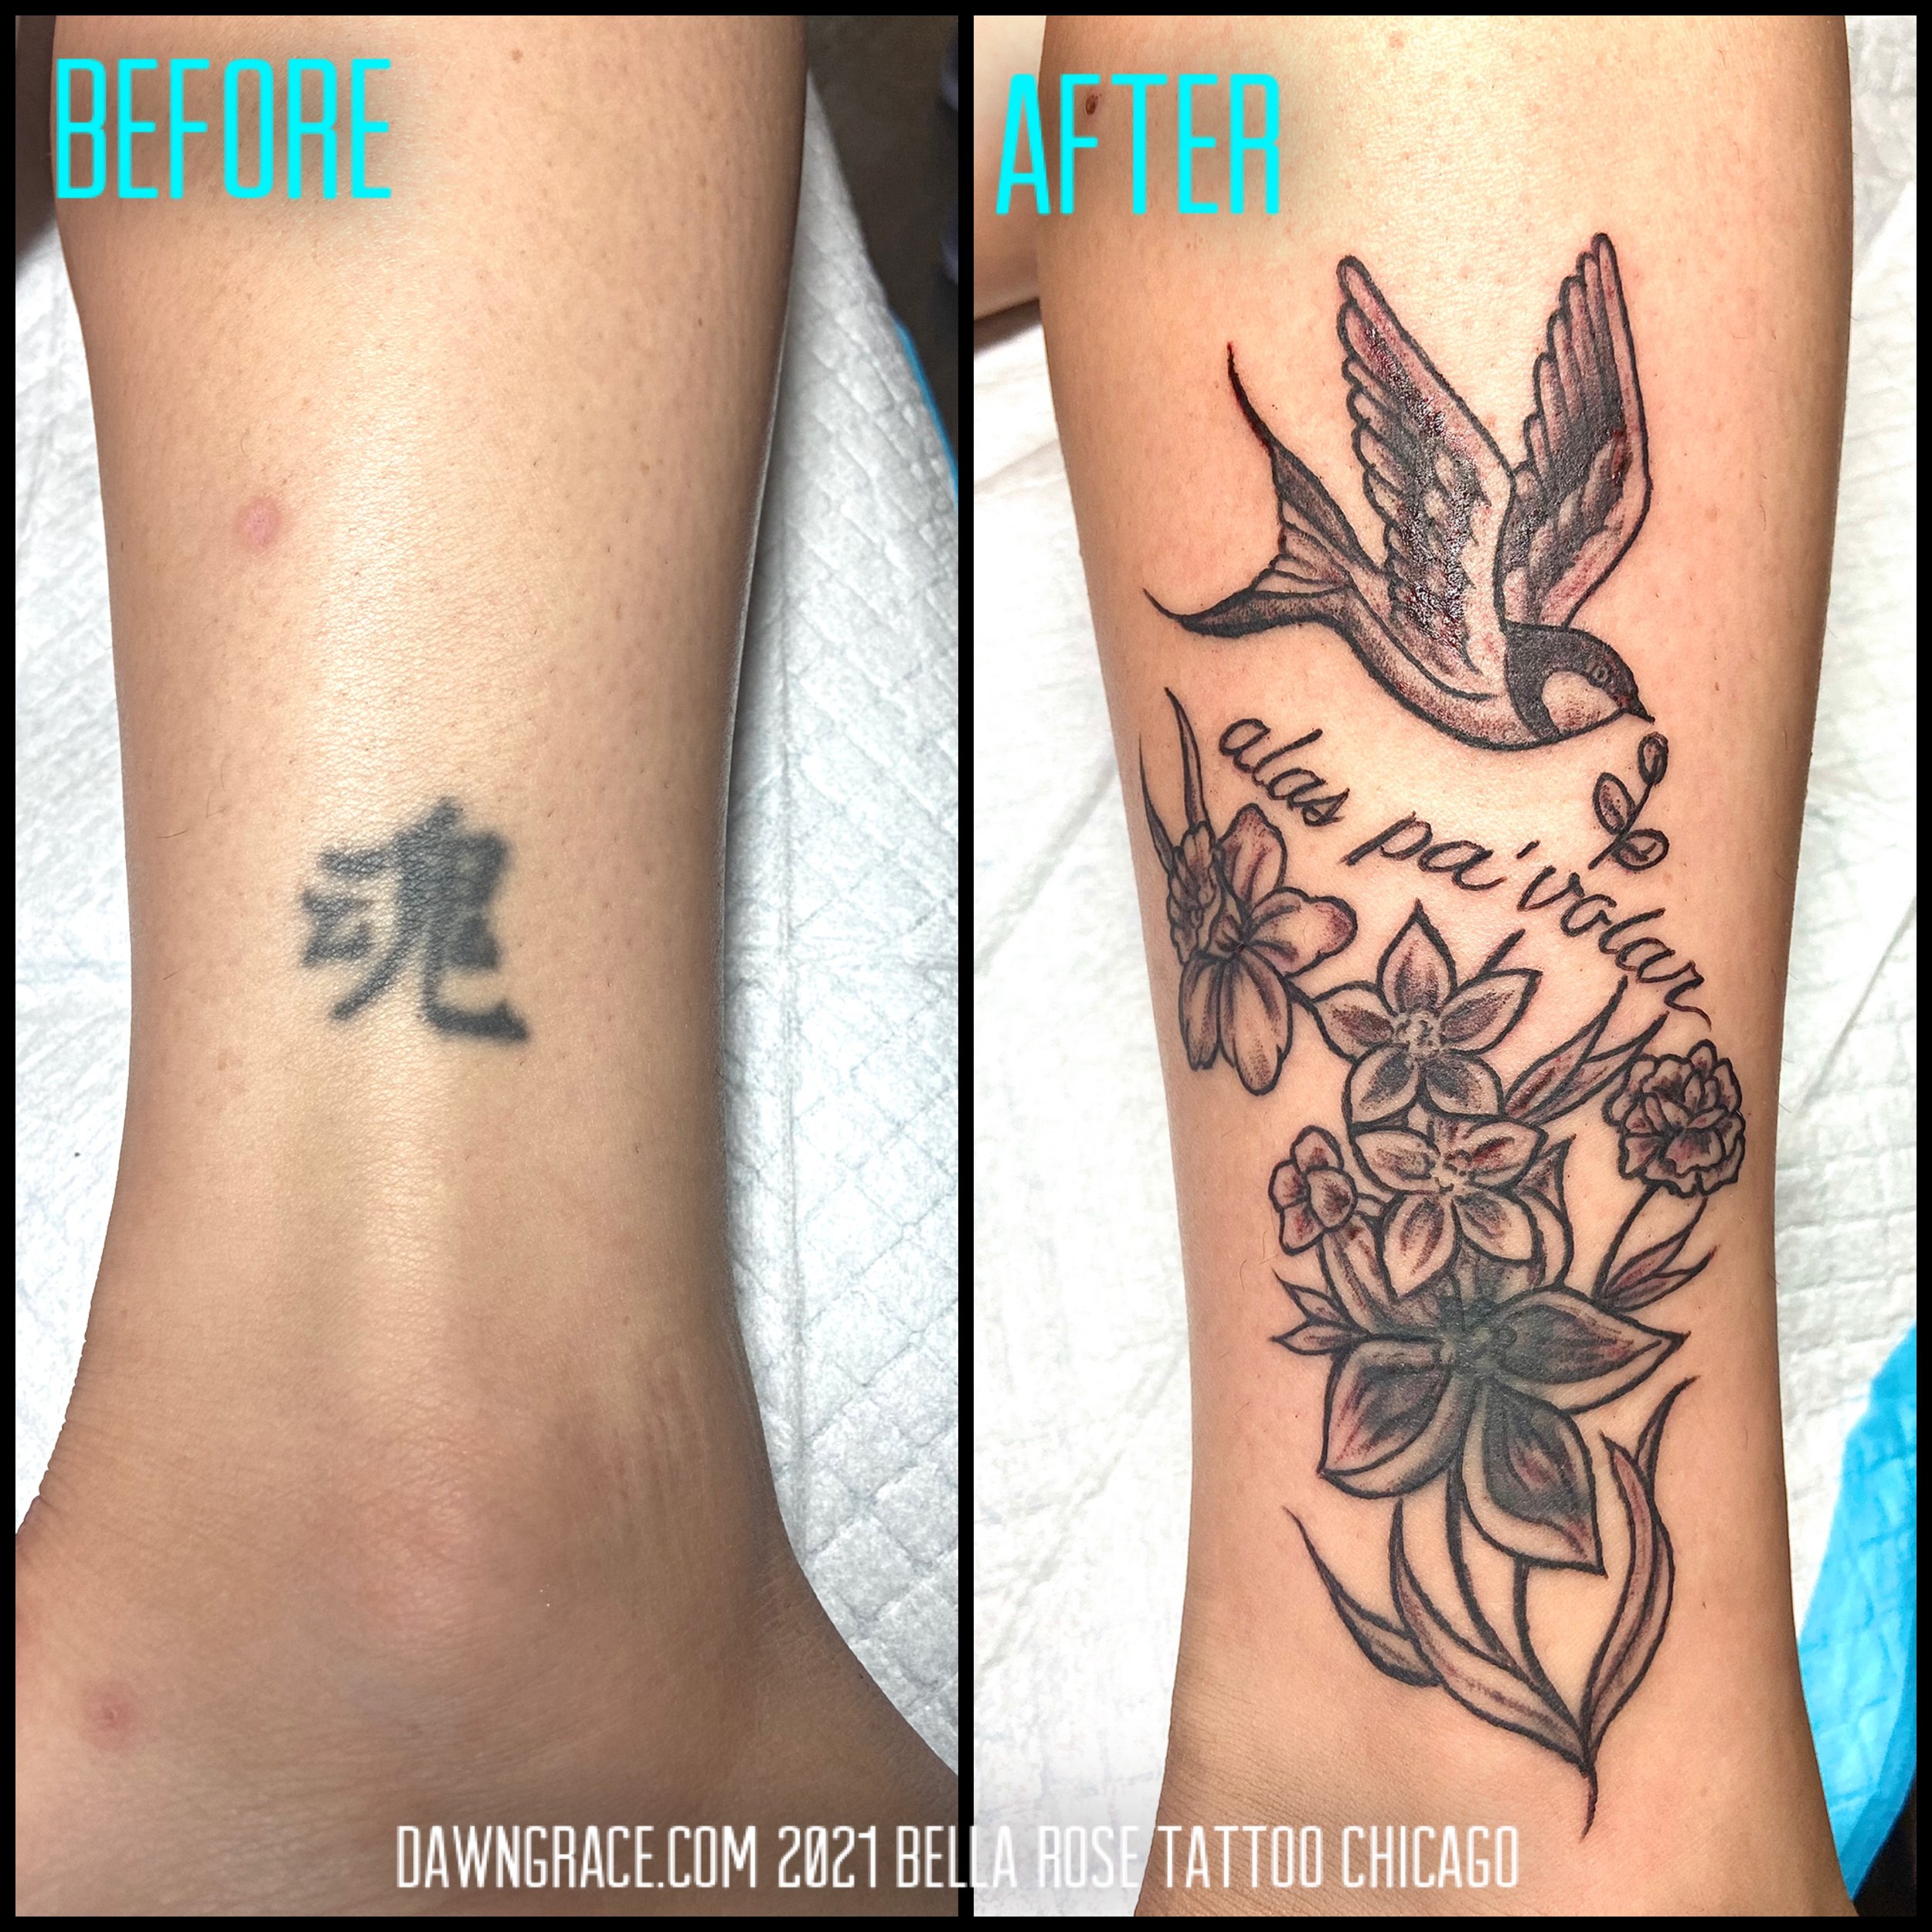 Coverup of a chinese character with a heart shaped lock  Cover tattoo Cover  up tattoos Tattoo coverup